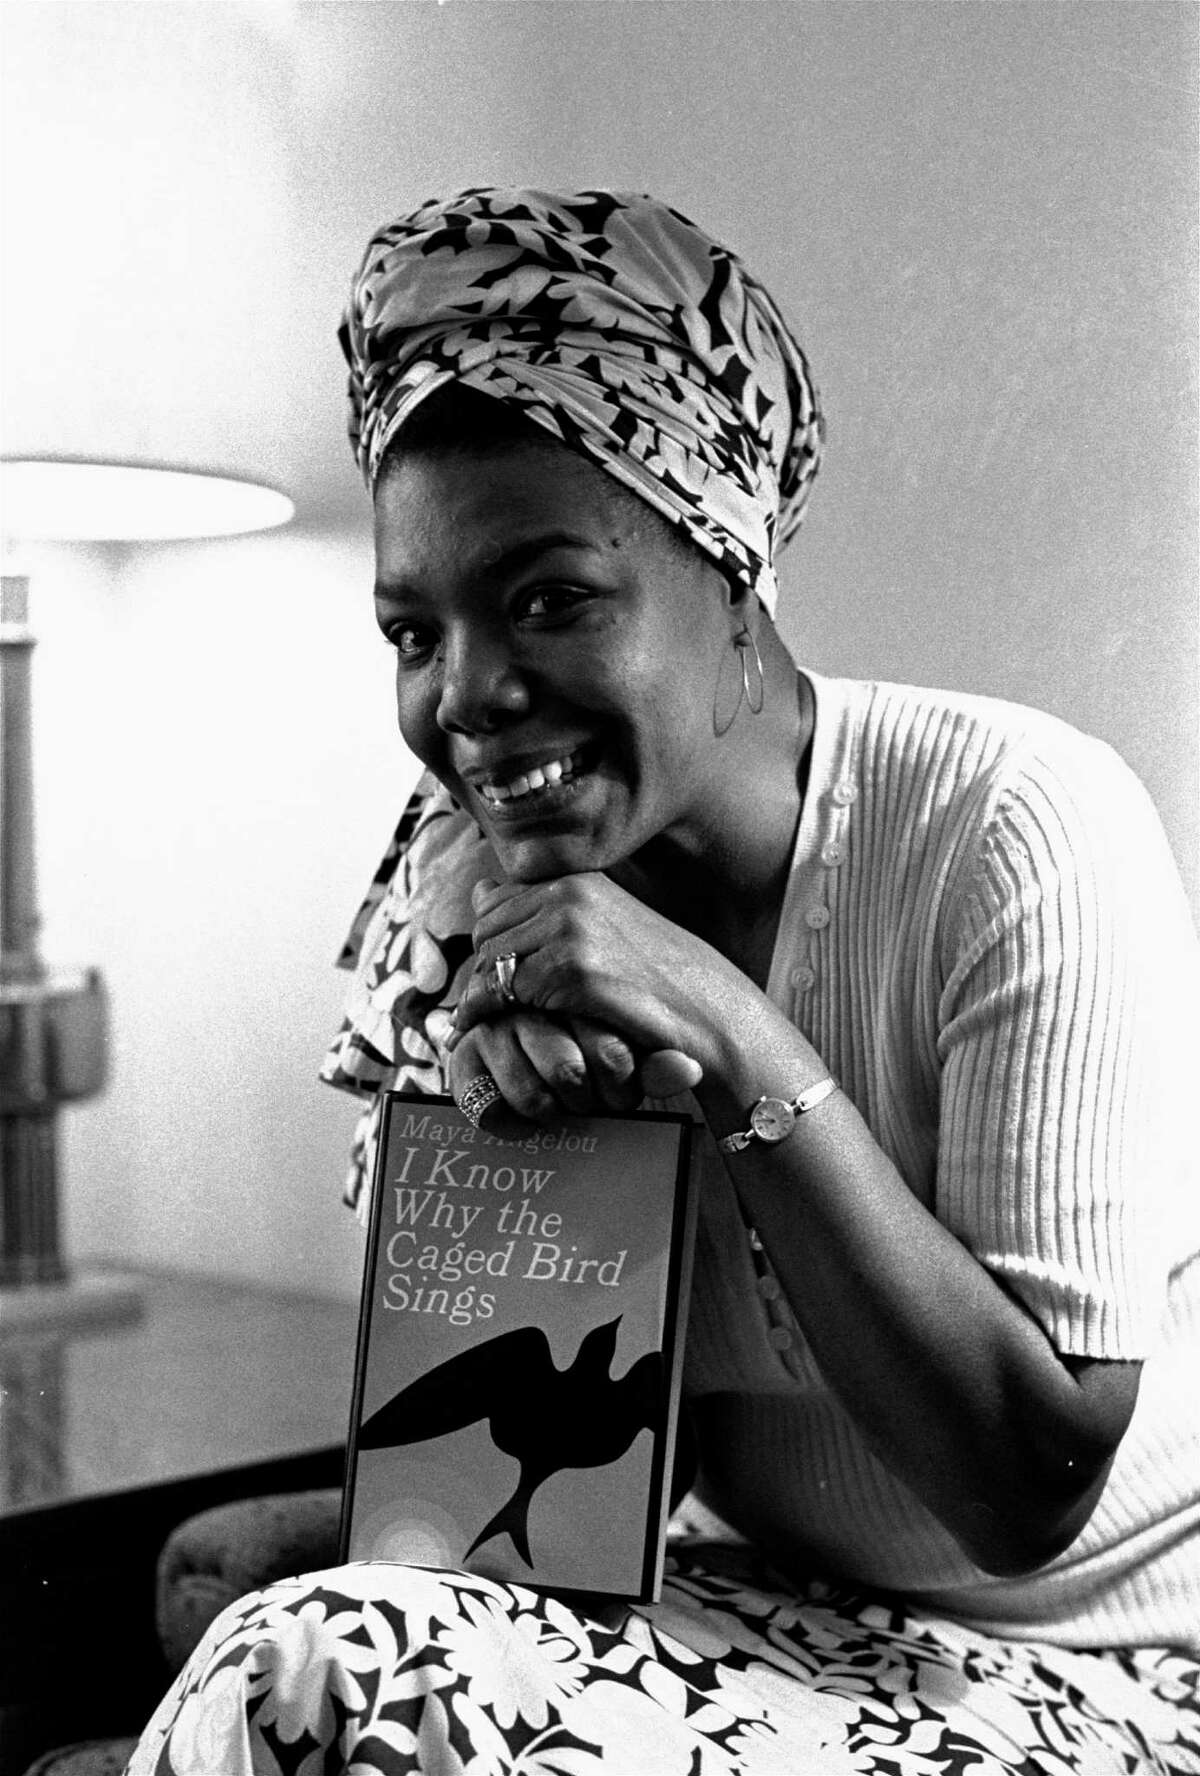 Angelou gained international fame with her seminal autobiography “I Know Why the Caged Bird Sings.”